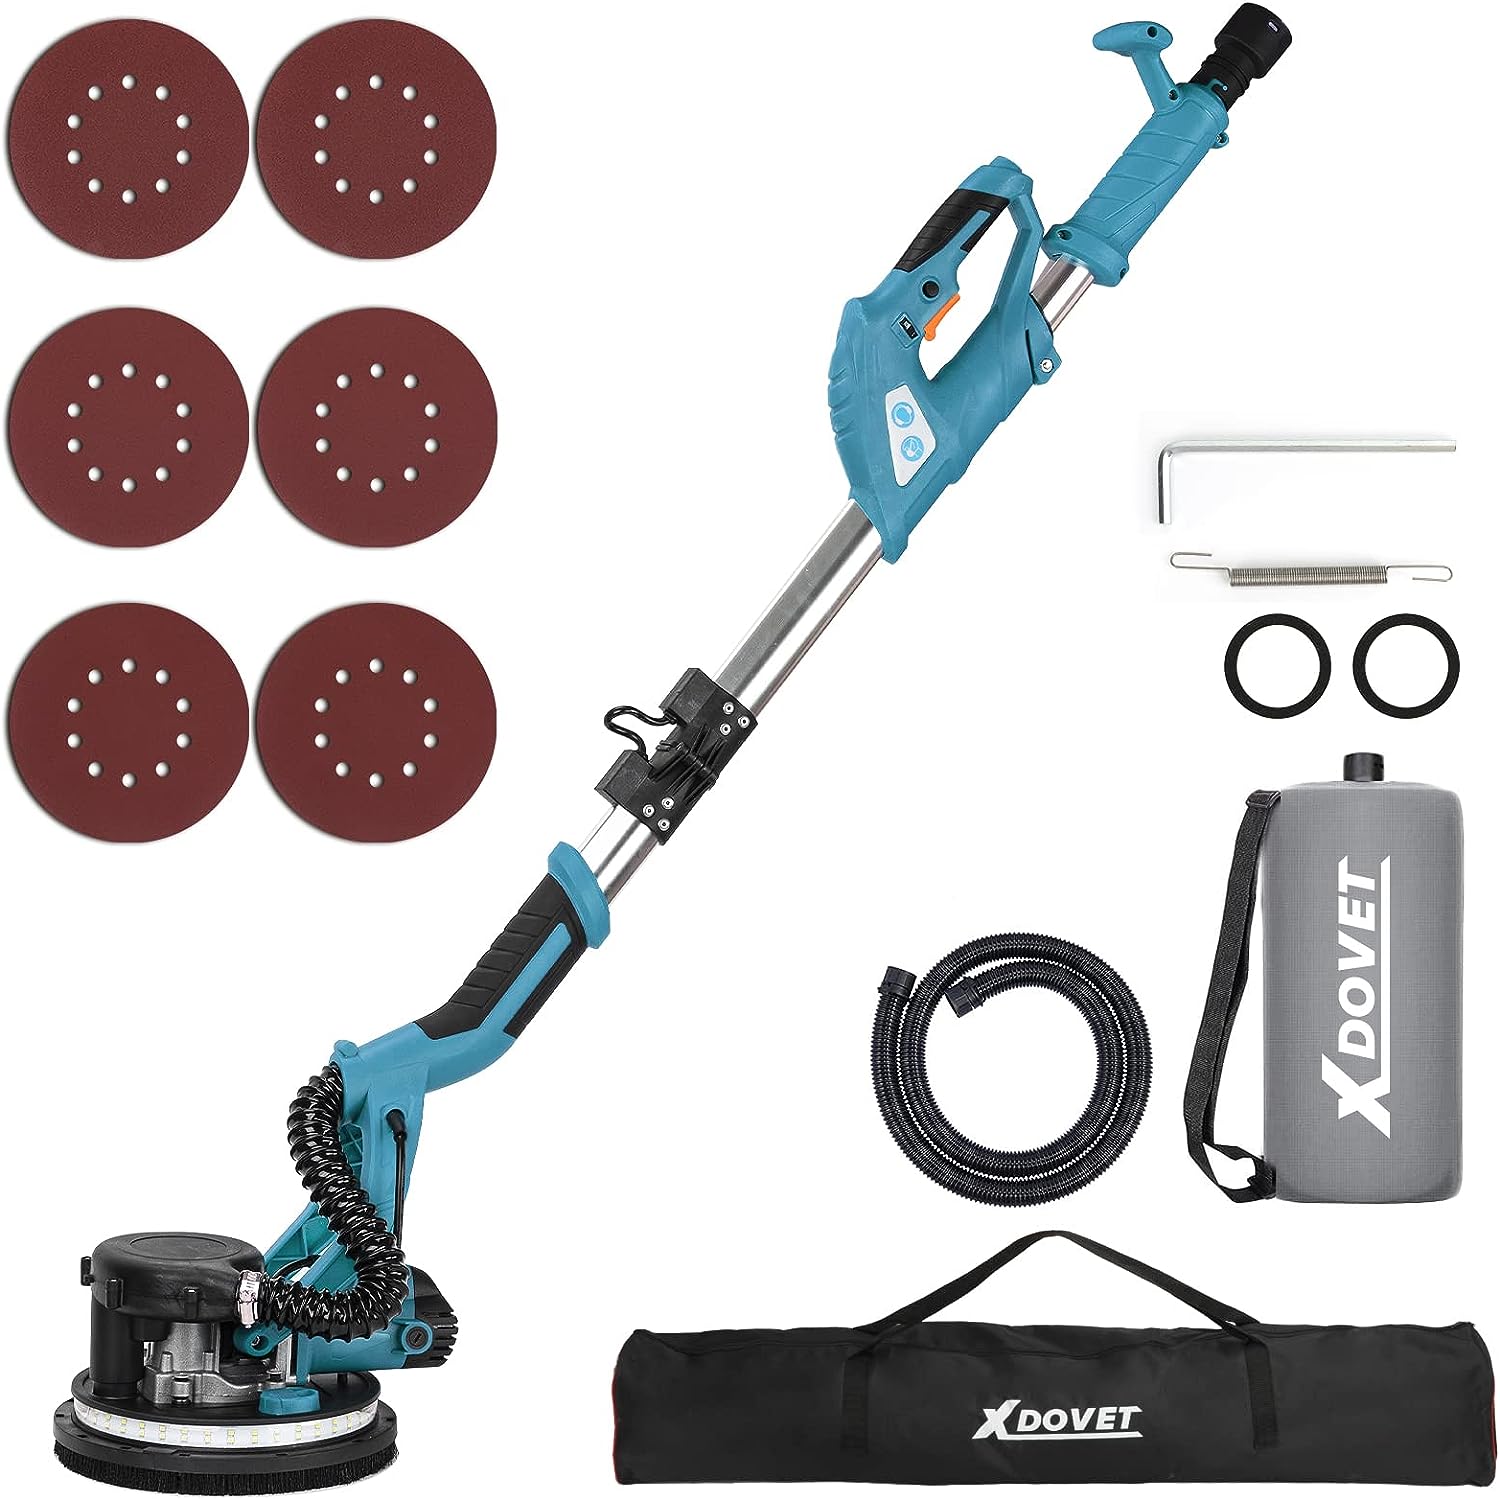 XDOVET Drywall Sander, 750W Electric Sander with 6 Pcs [...]